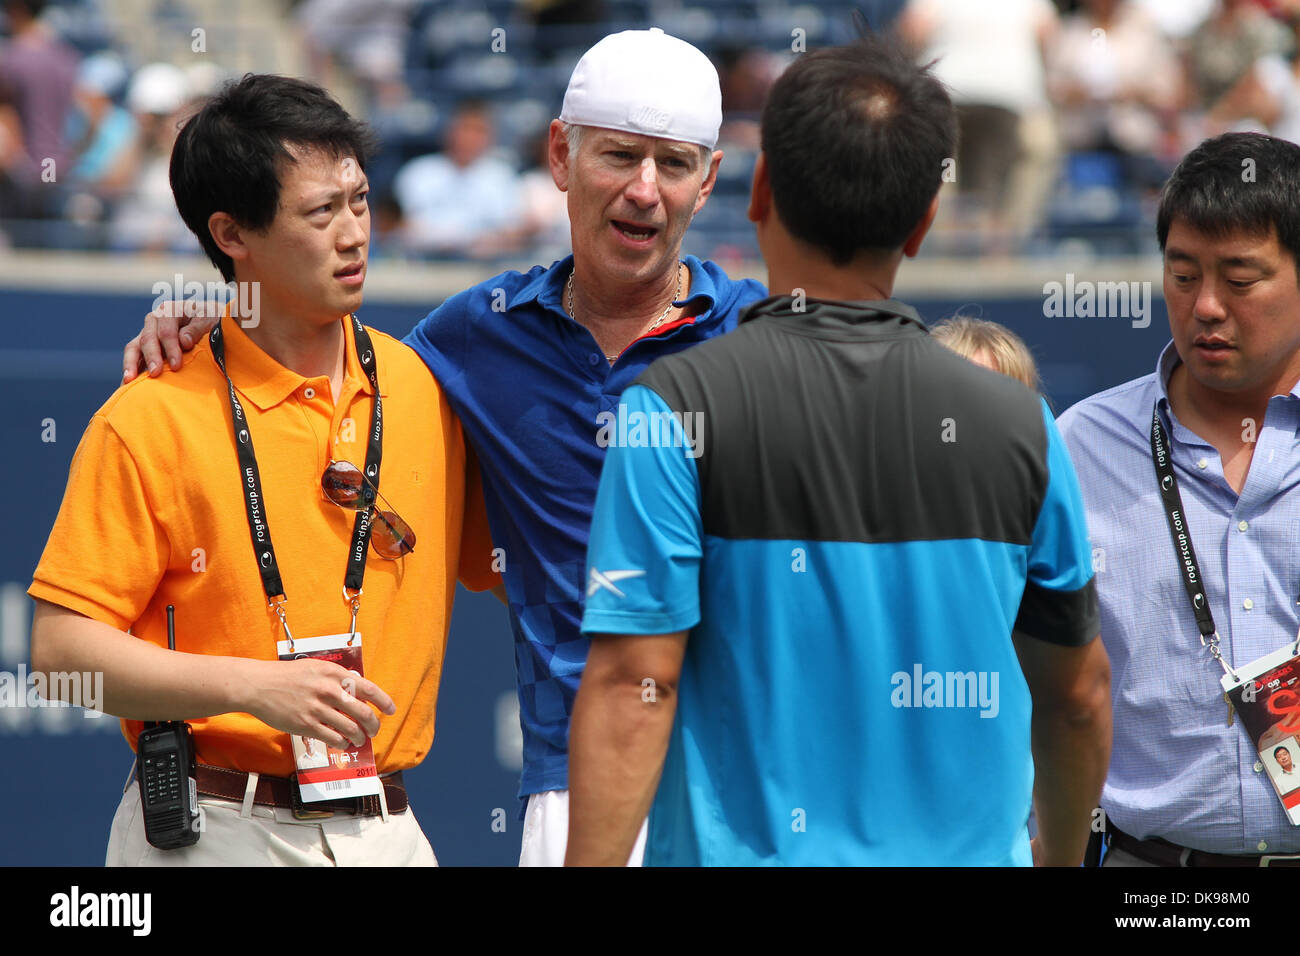 Aug. 13, 2011 - Toronto, Ontario, Canada - USA's legend John McEnroe with court doctors after his upper leg injury forces him out of the match at the Rogers Cup, played at the Rexall Centre in Toronto. Chan was leading when McEnroe was injured. (Credit Image: Â© Steve Dormer/Southcreek Global/ZUMAPRESS.com) Stock Photo